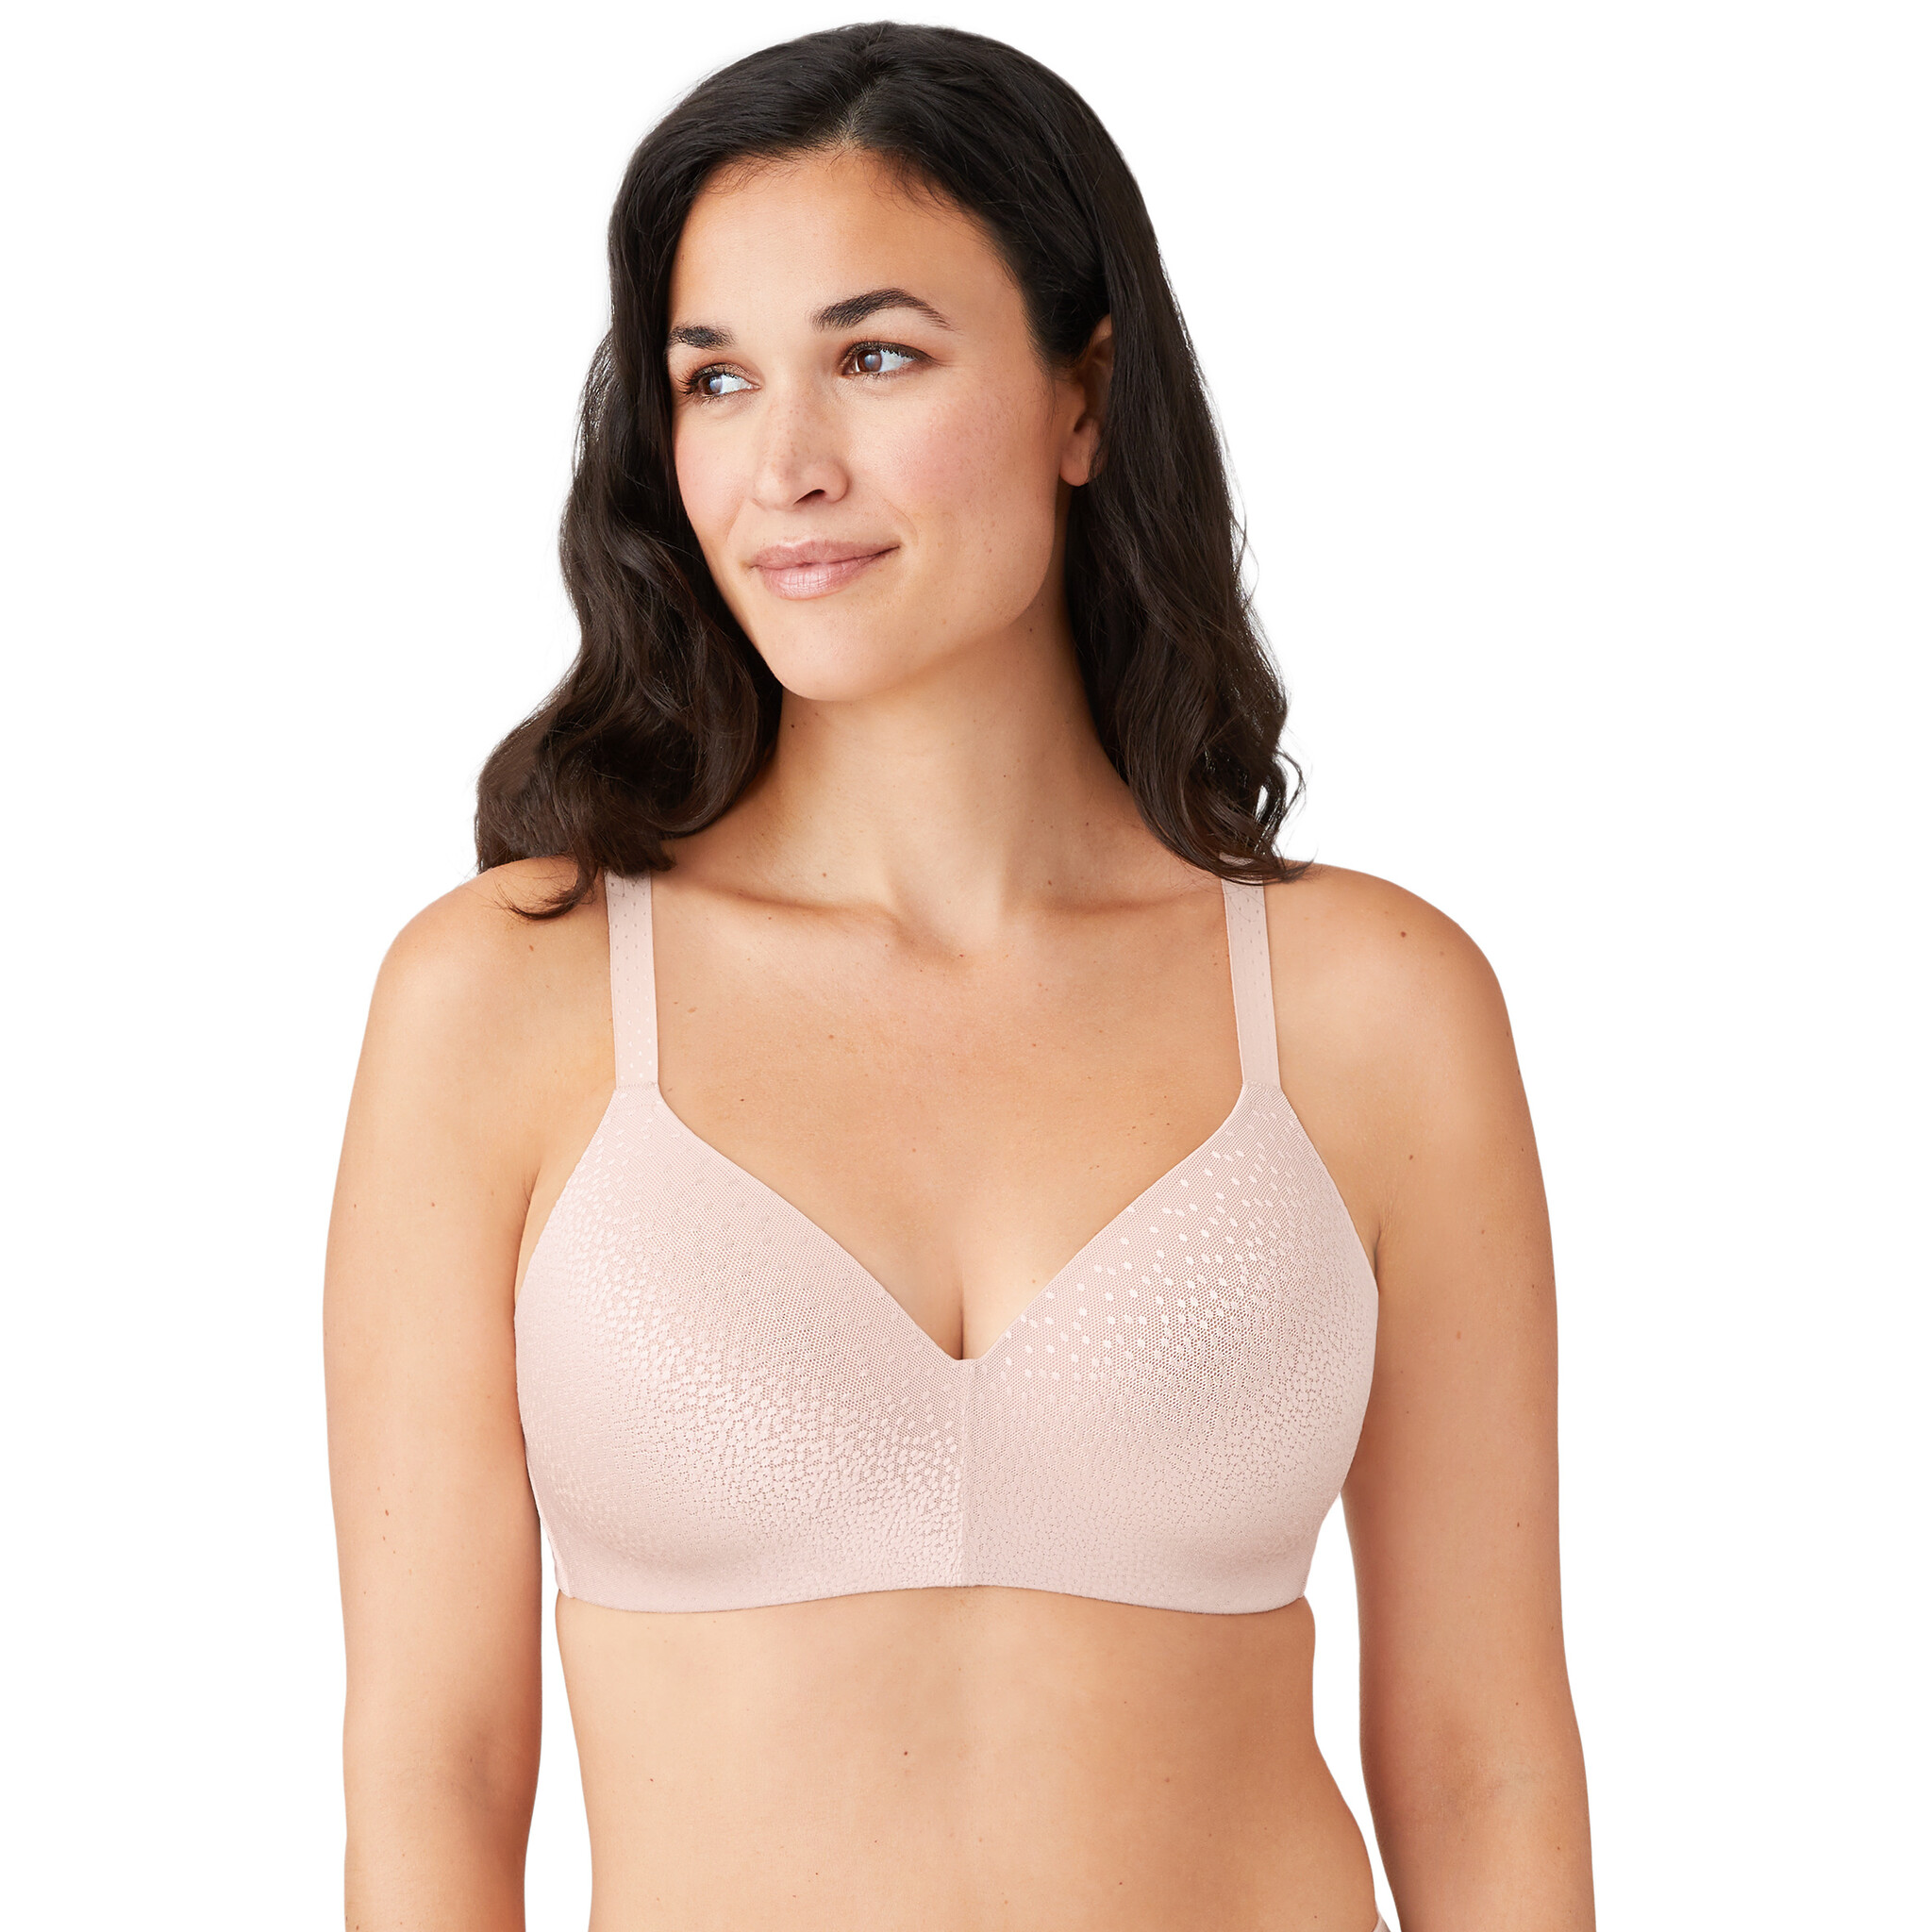 Undies.com Micro 34D Full Coverage Convertible Unlined Bra for